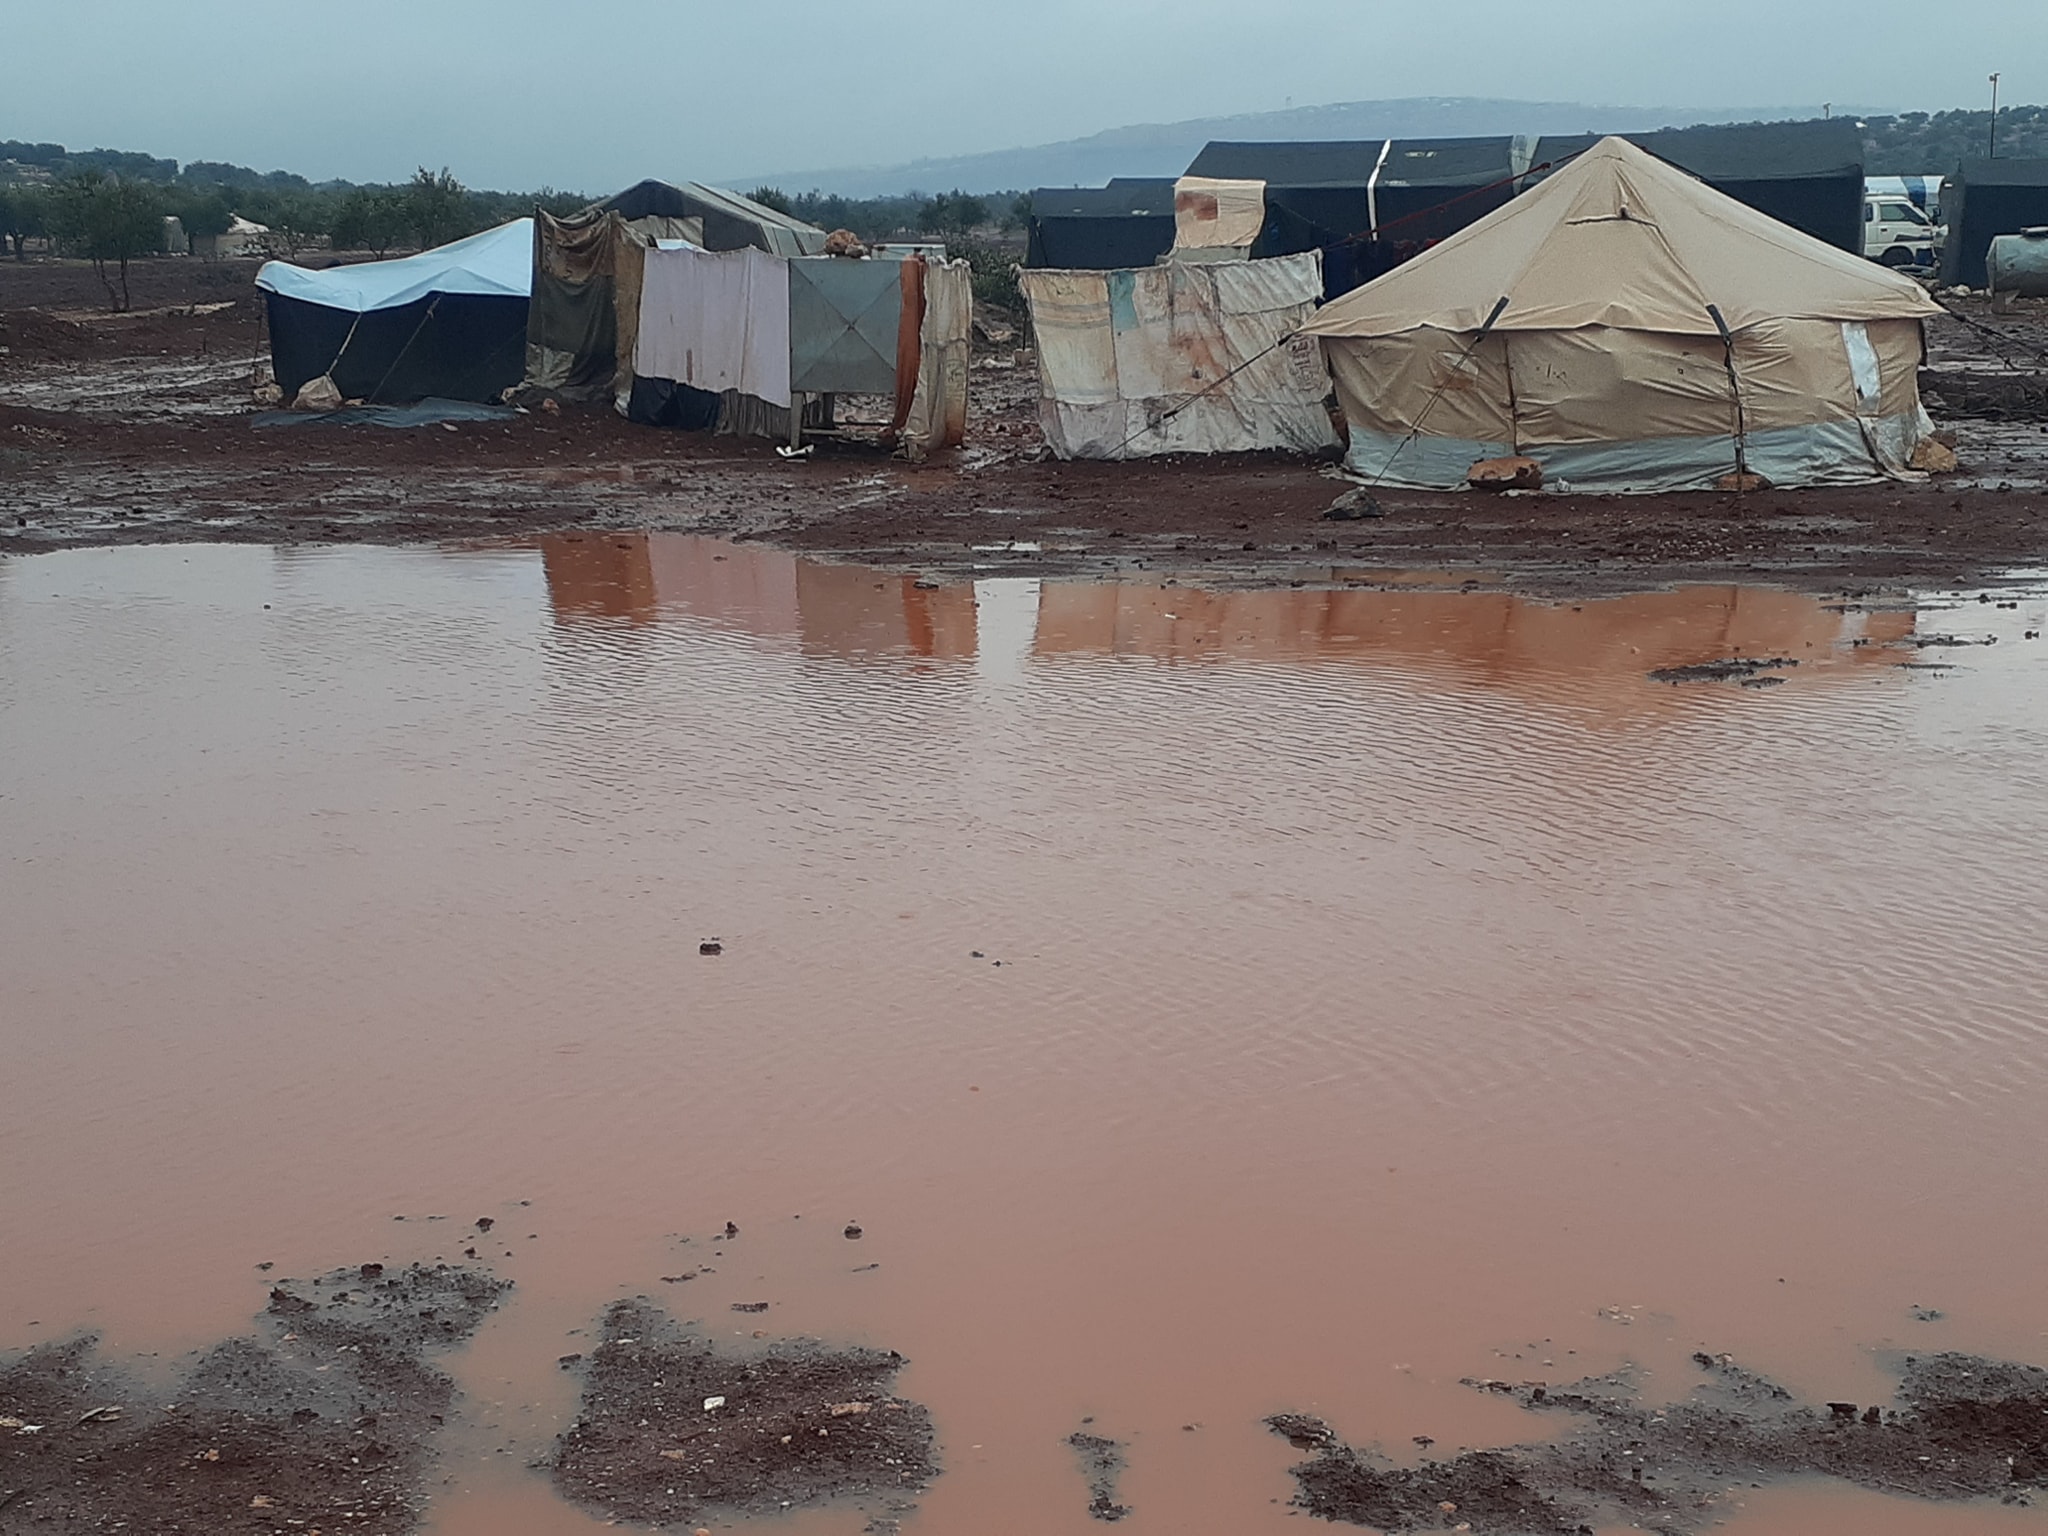 Rain storm damaged IDP camps in Syria 19-12-2021